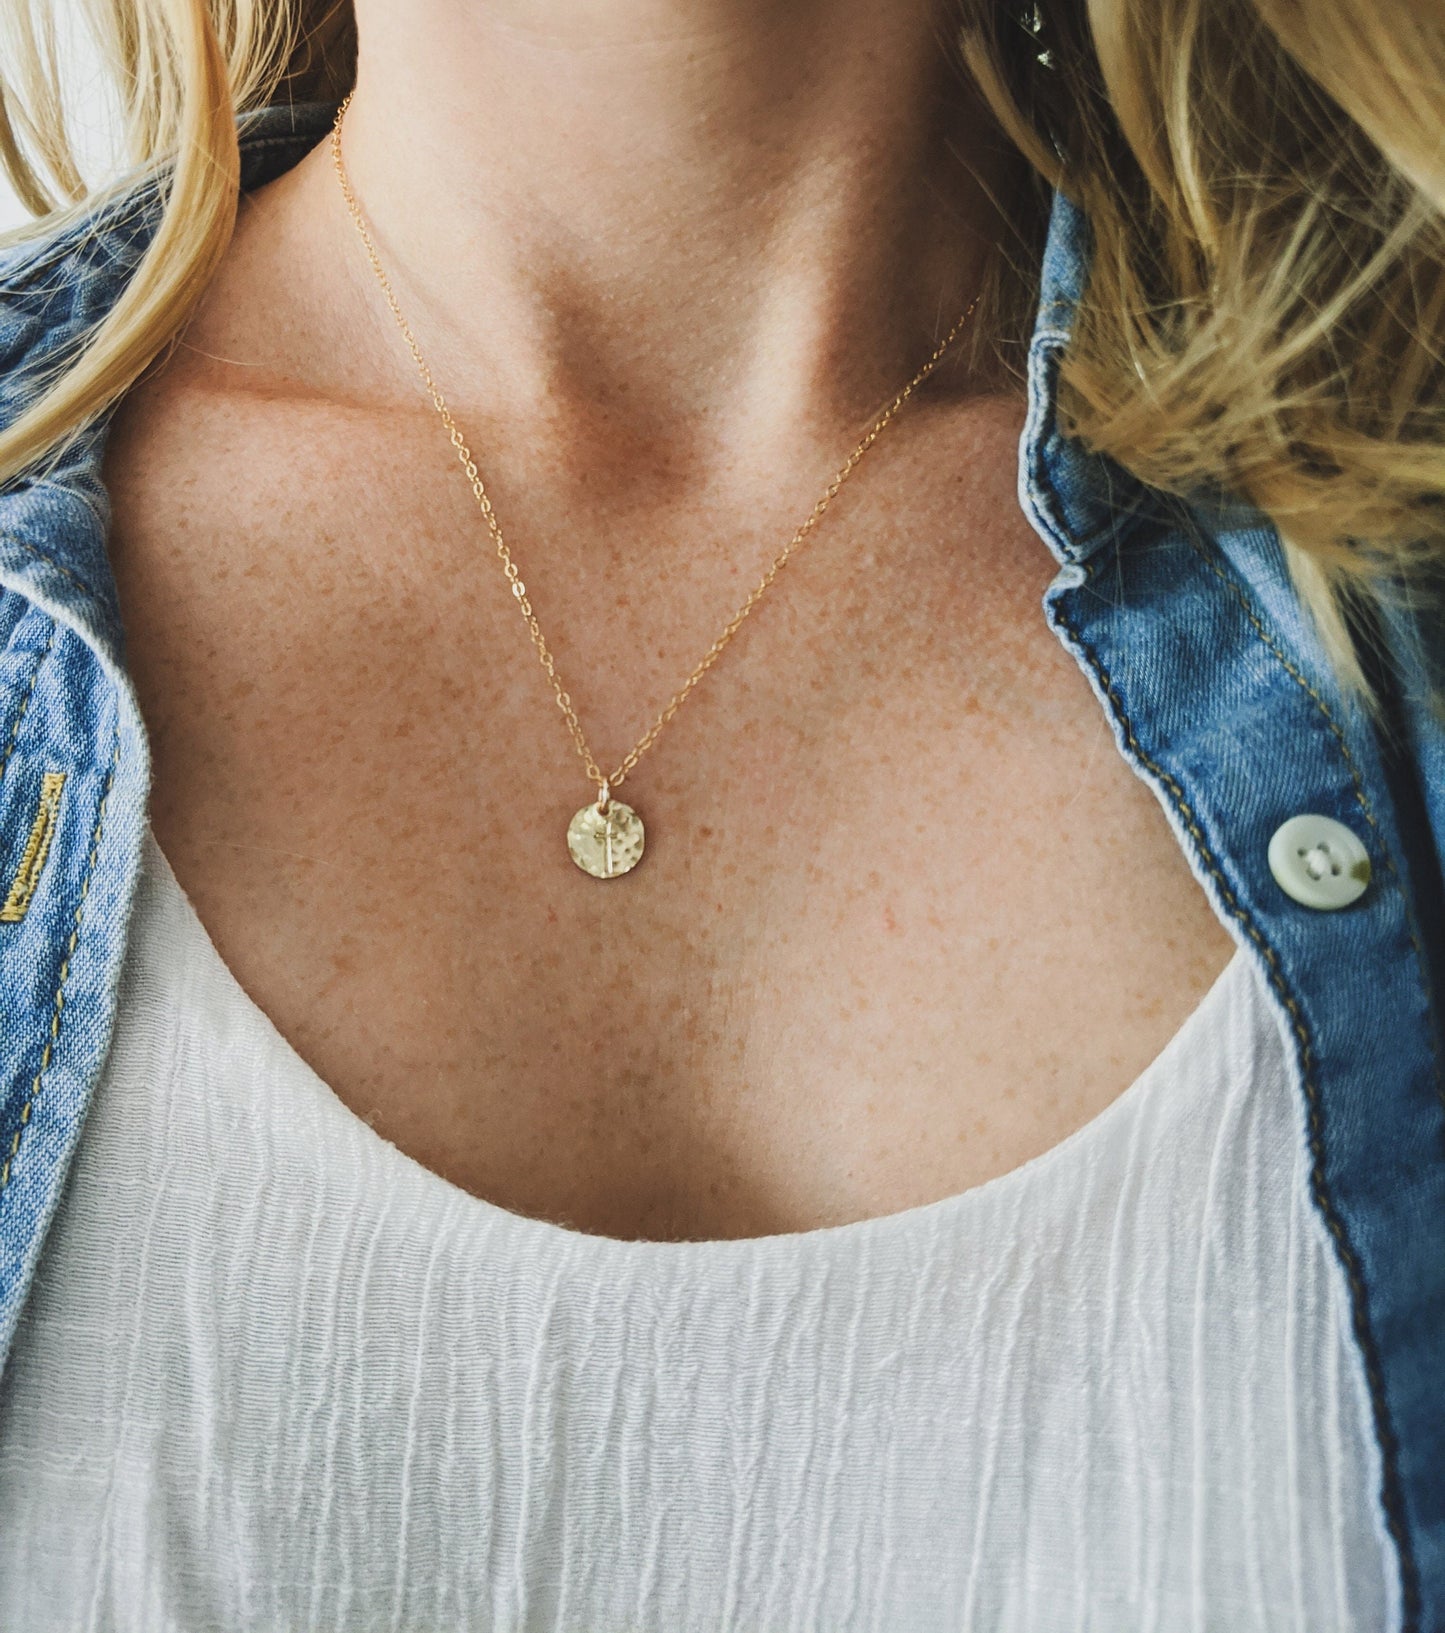 Dainty Cross Necklace, Sterling Silver or 14k gold Fill, Minimal Cross Necklace